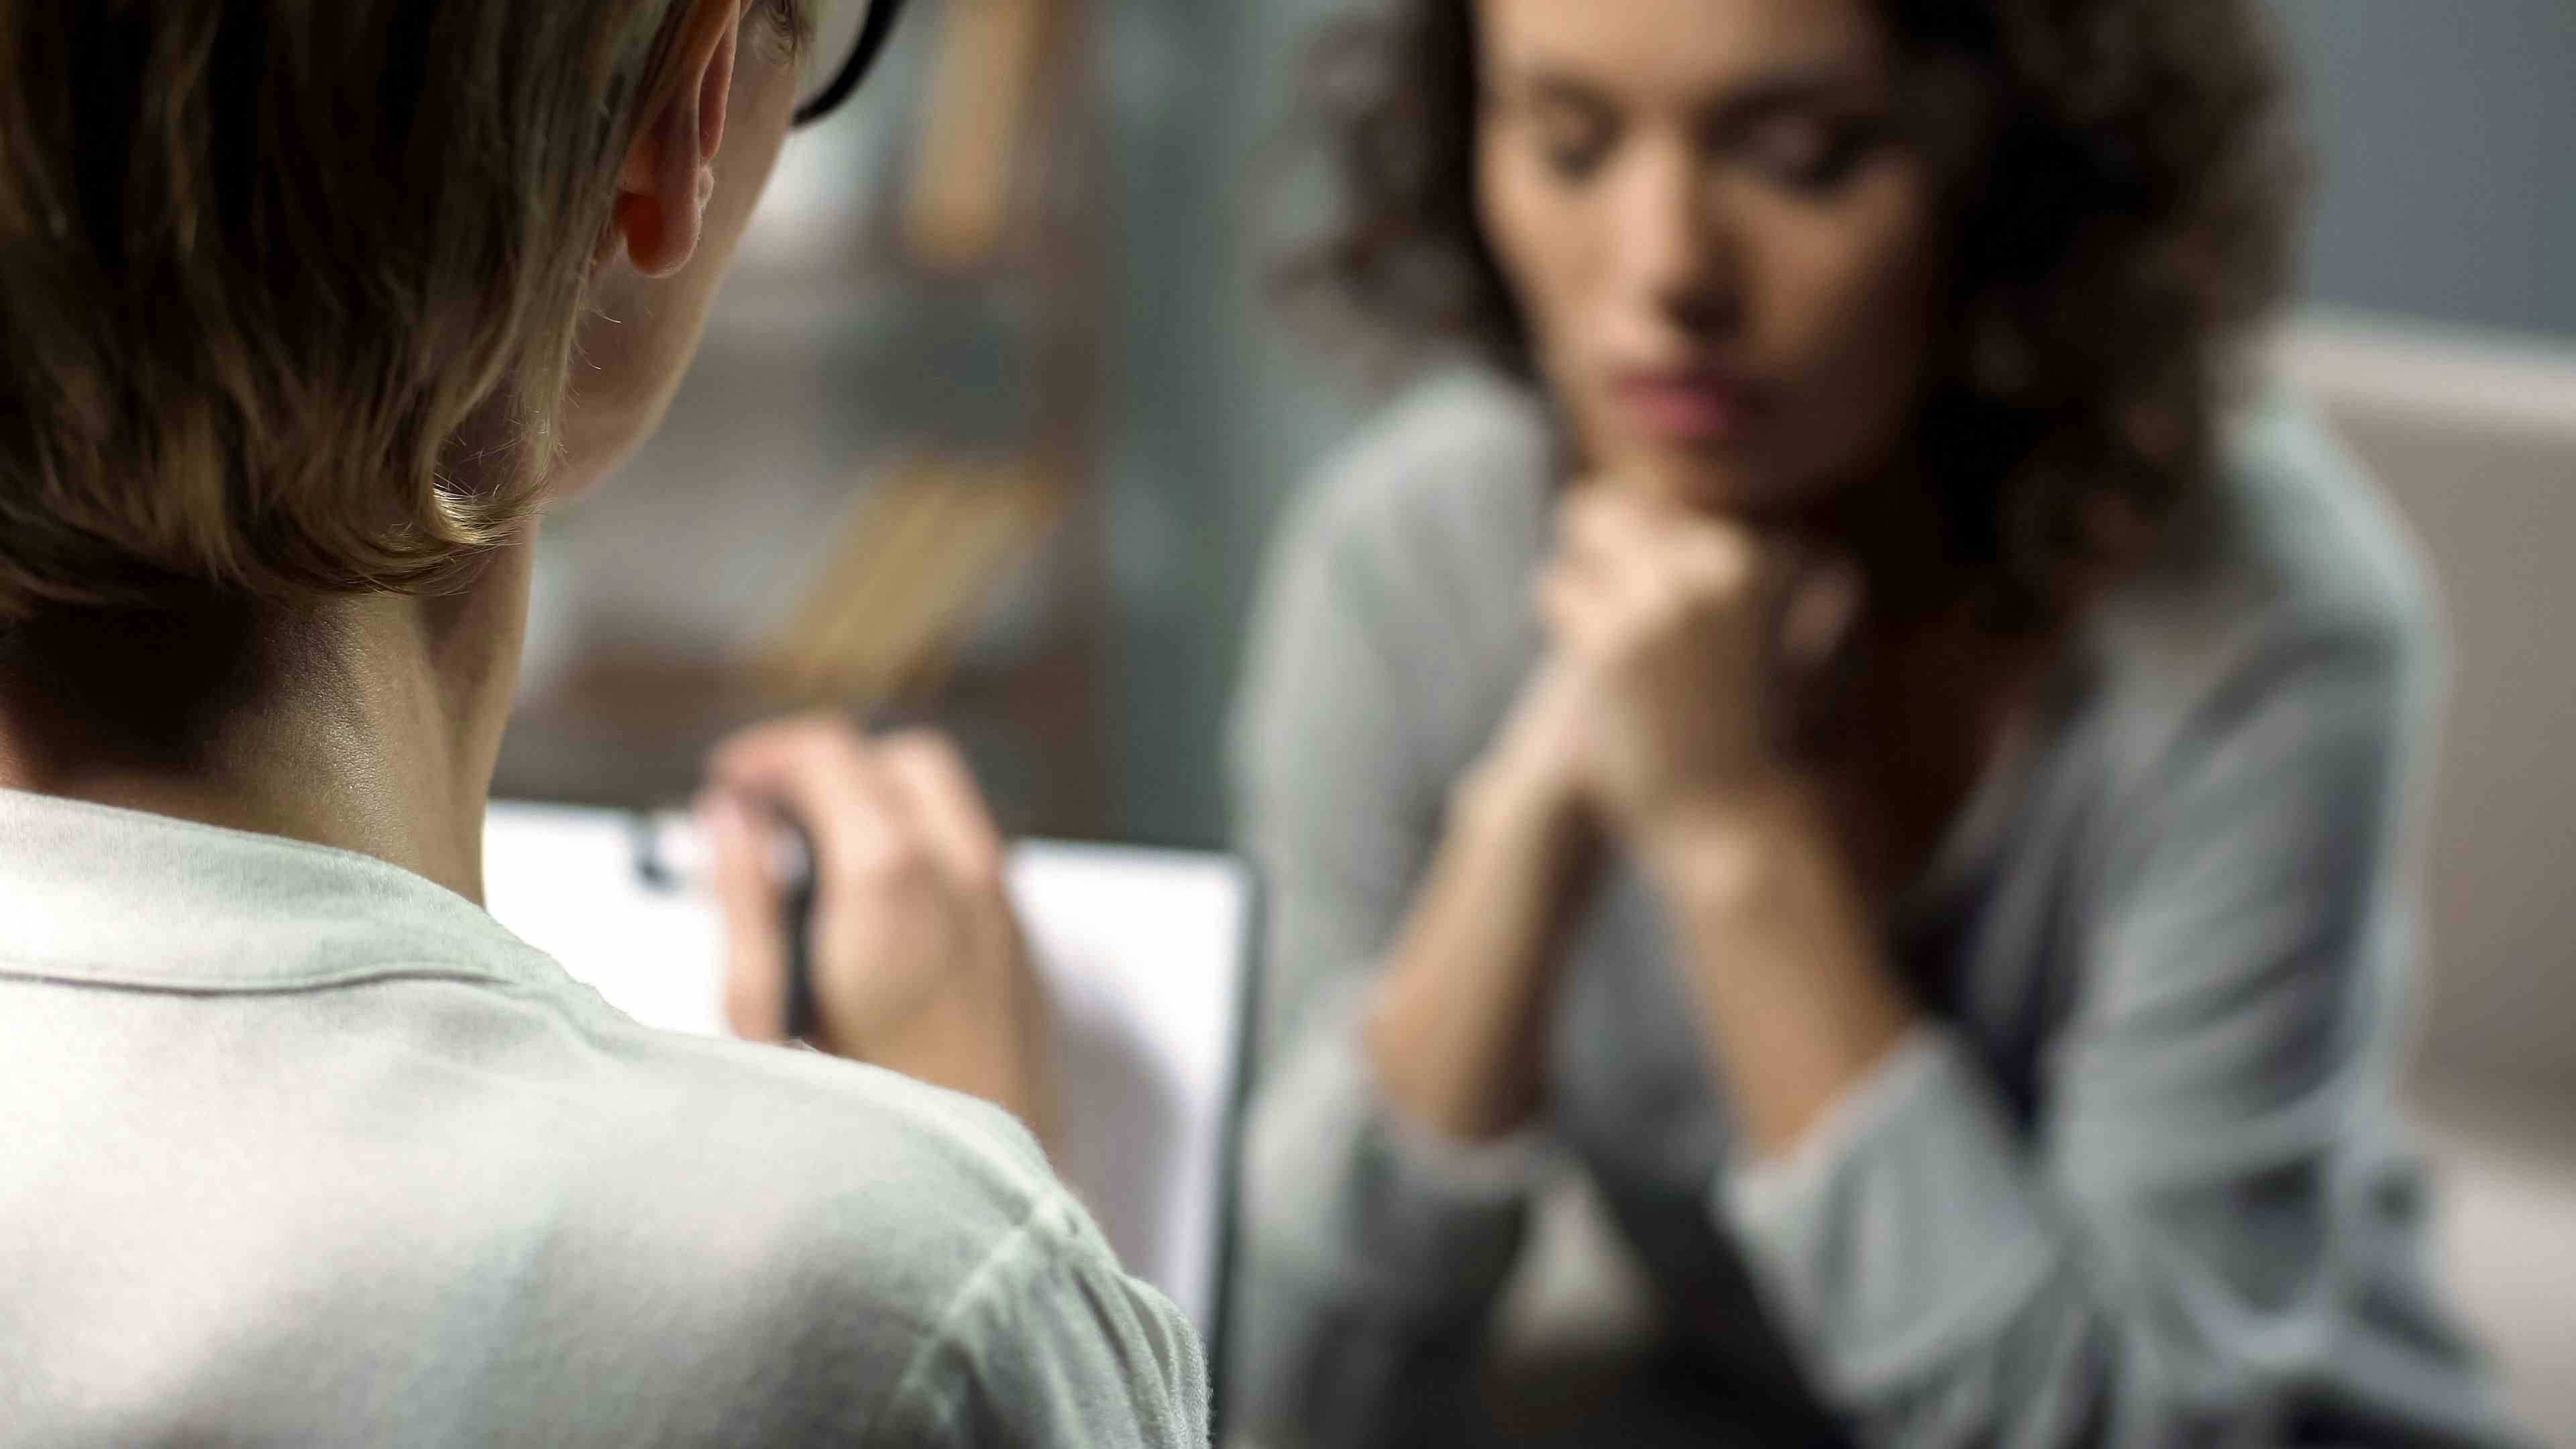 Young depressed woman talking to lady psychologist during session, mental health - Image credit: motortion | stock.adobe.com